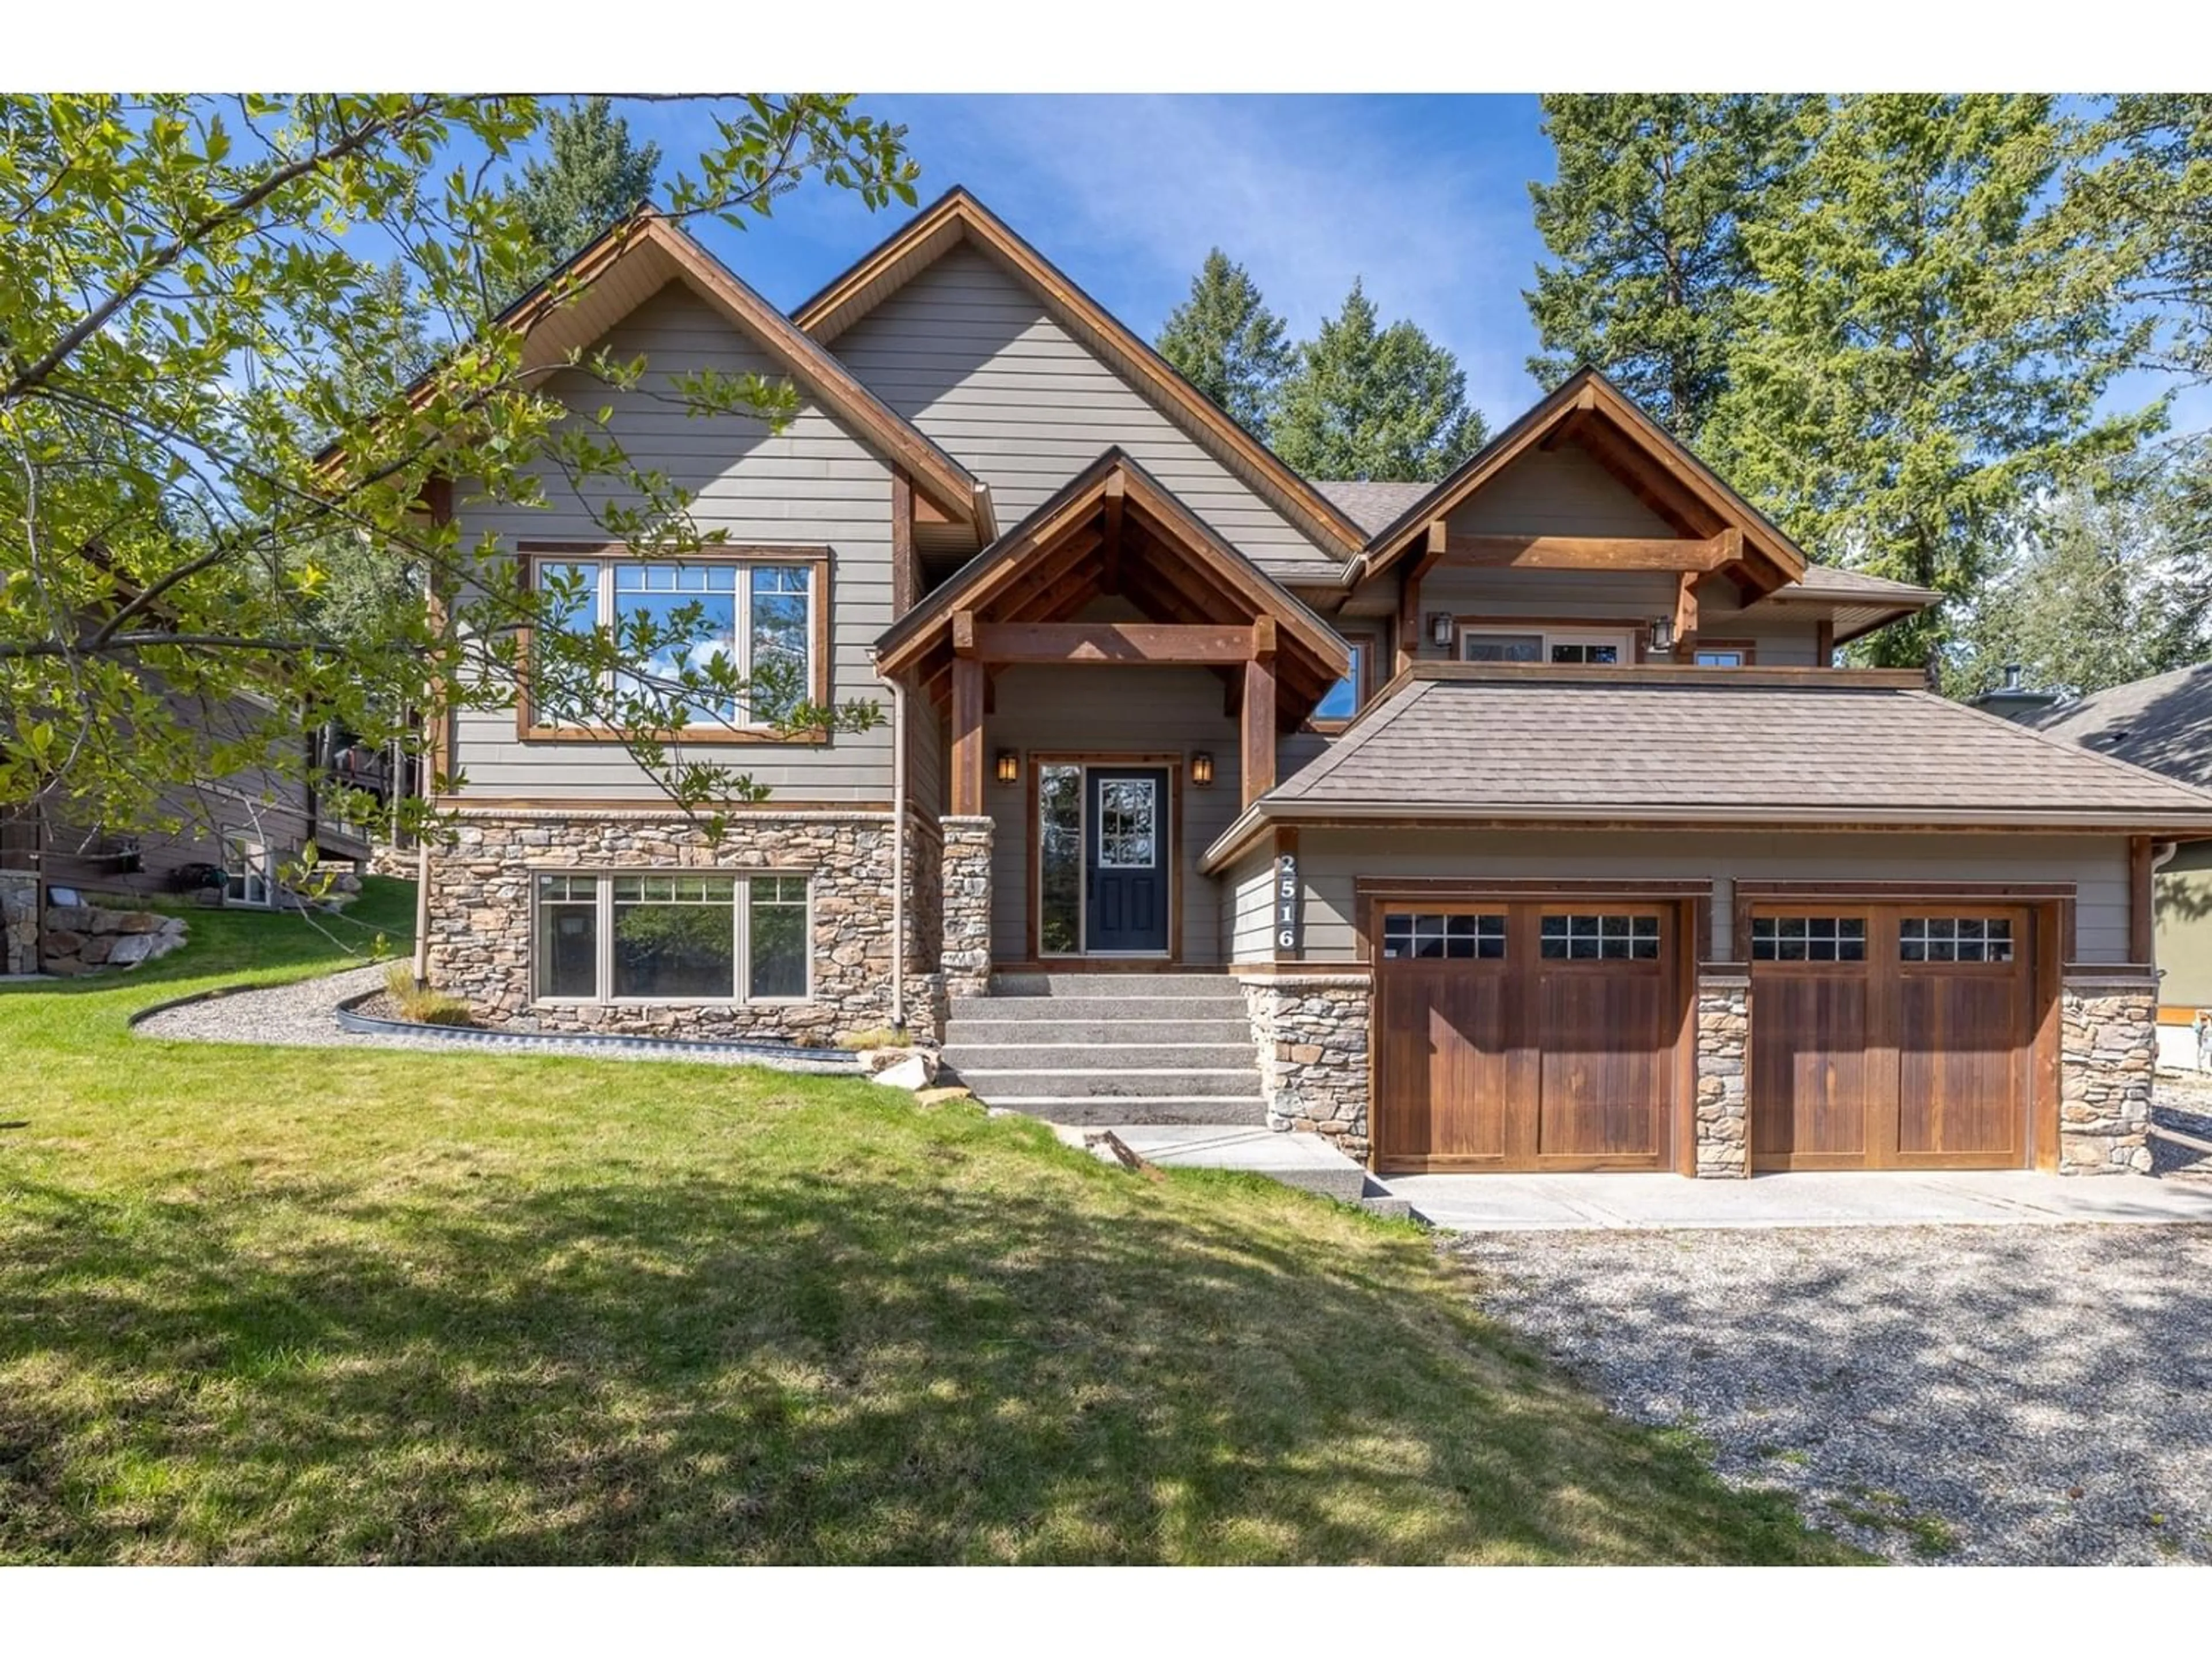 Home with brick exterior material for 2516 COBBLESTONE CIRCLE, Invermere British Columbia V0A1K4